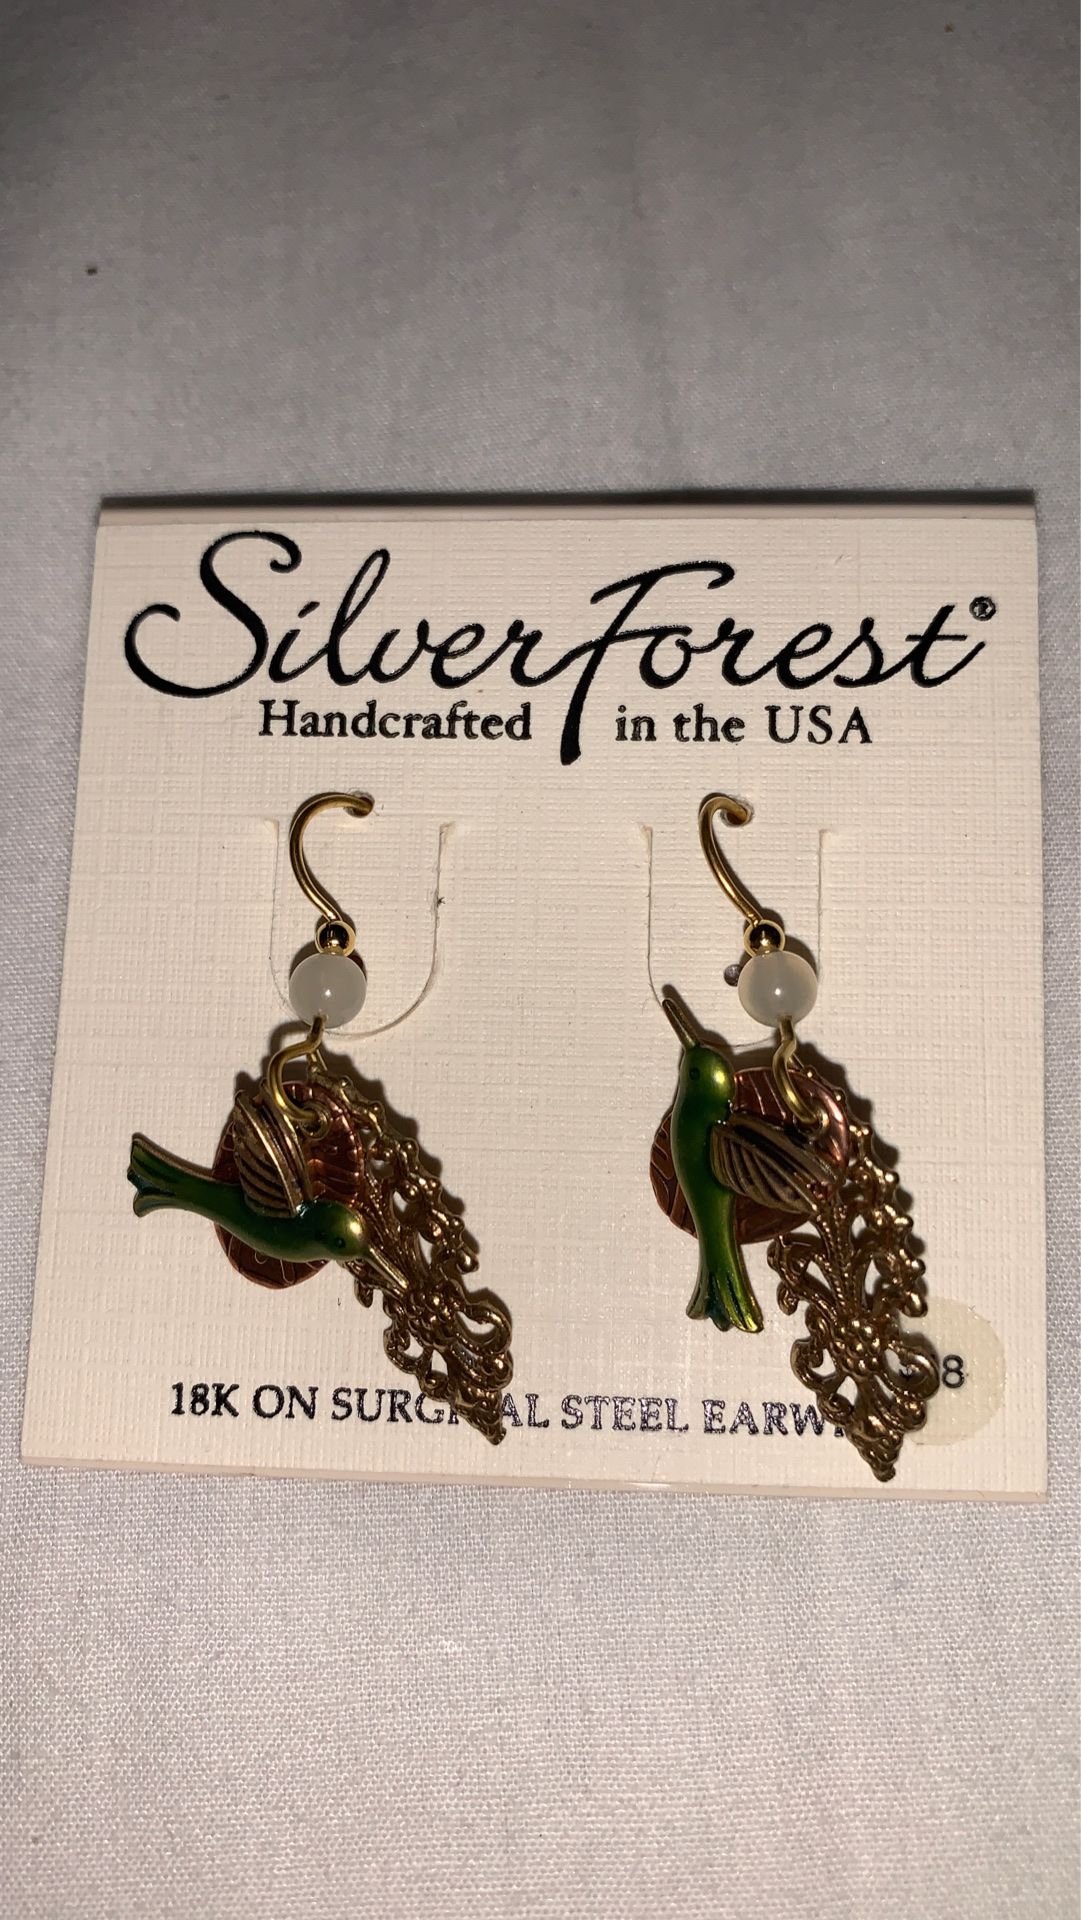 Brand new earring silver forest paid 18 and I will take 12